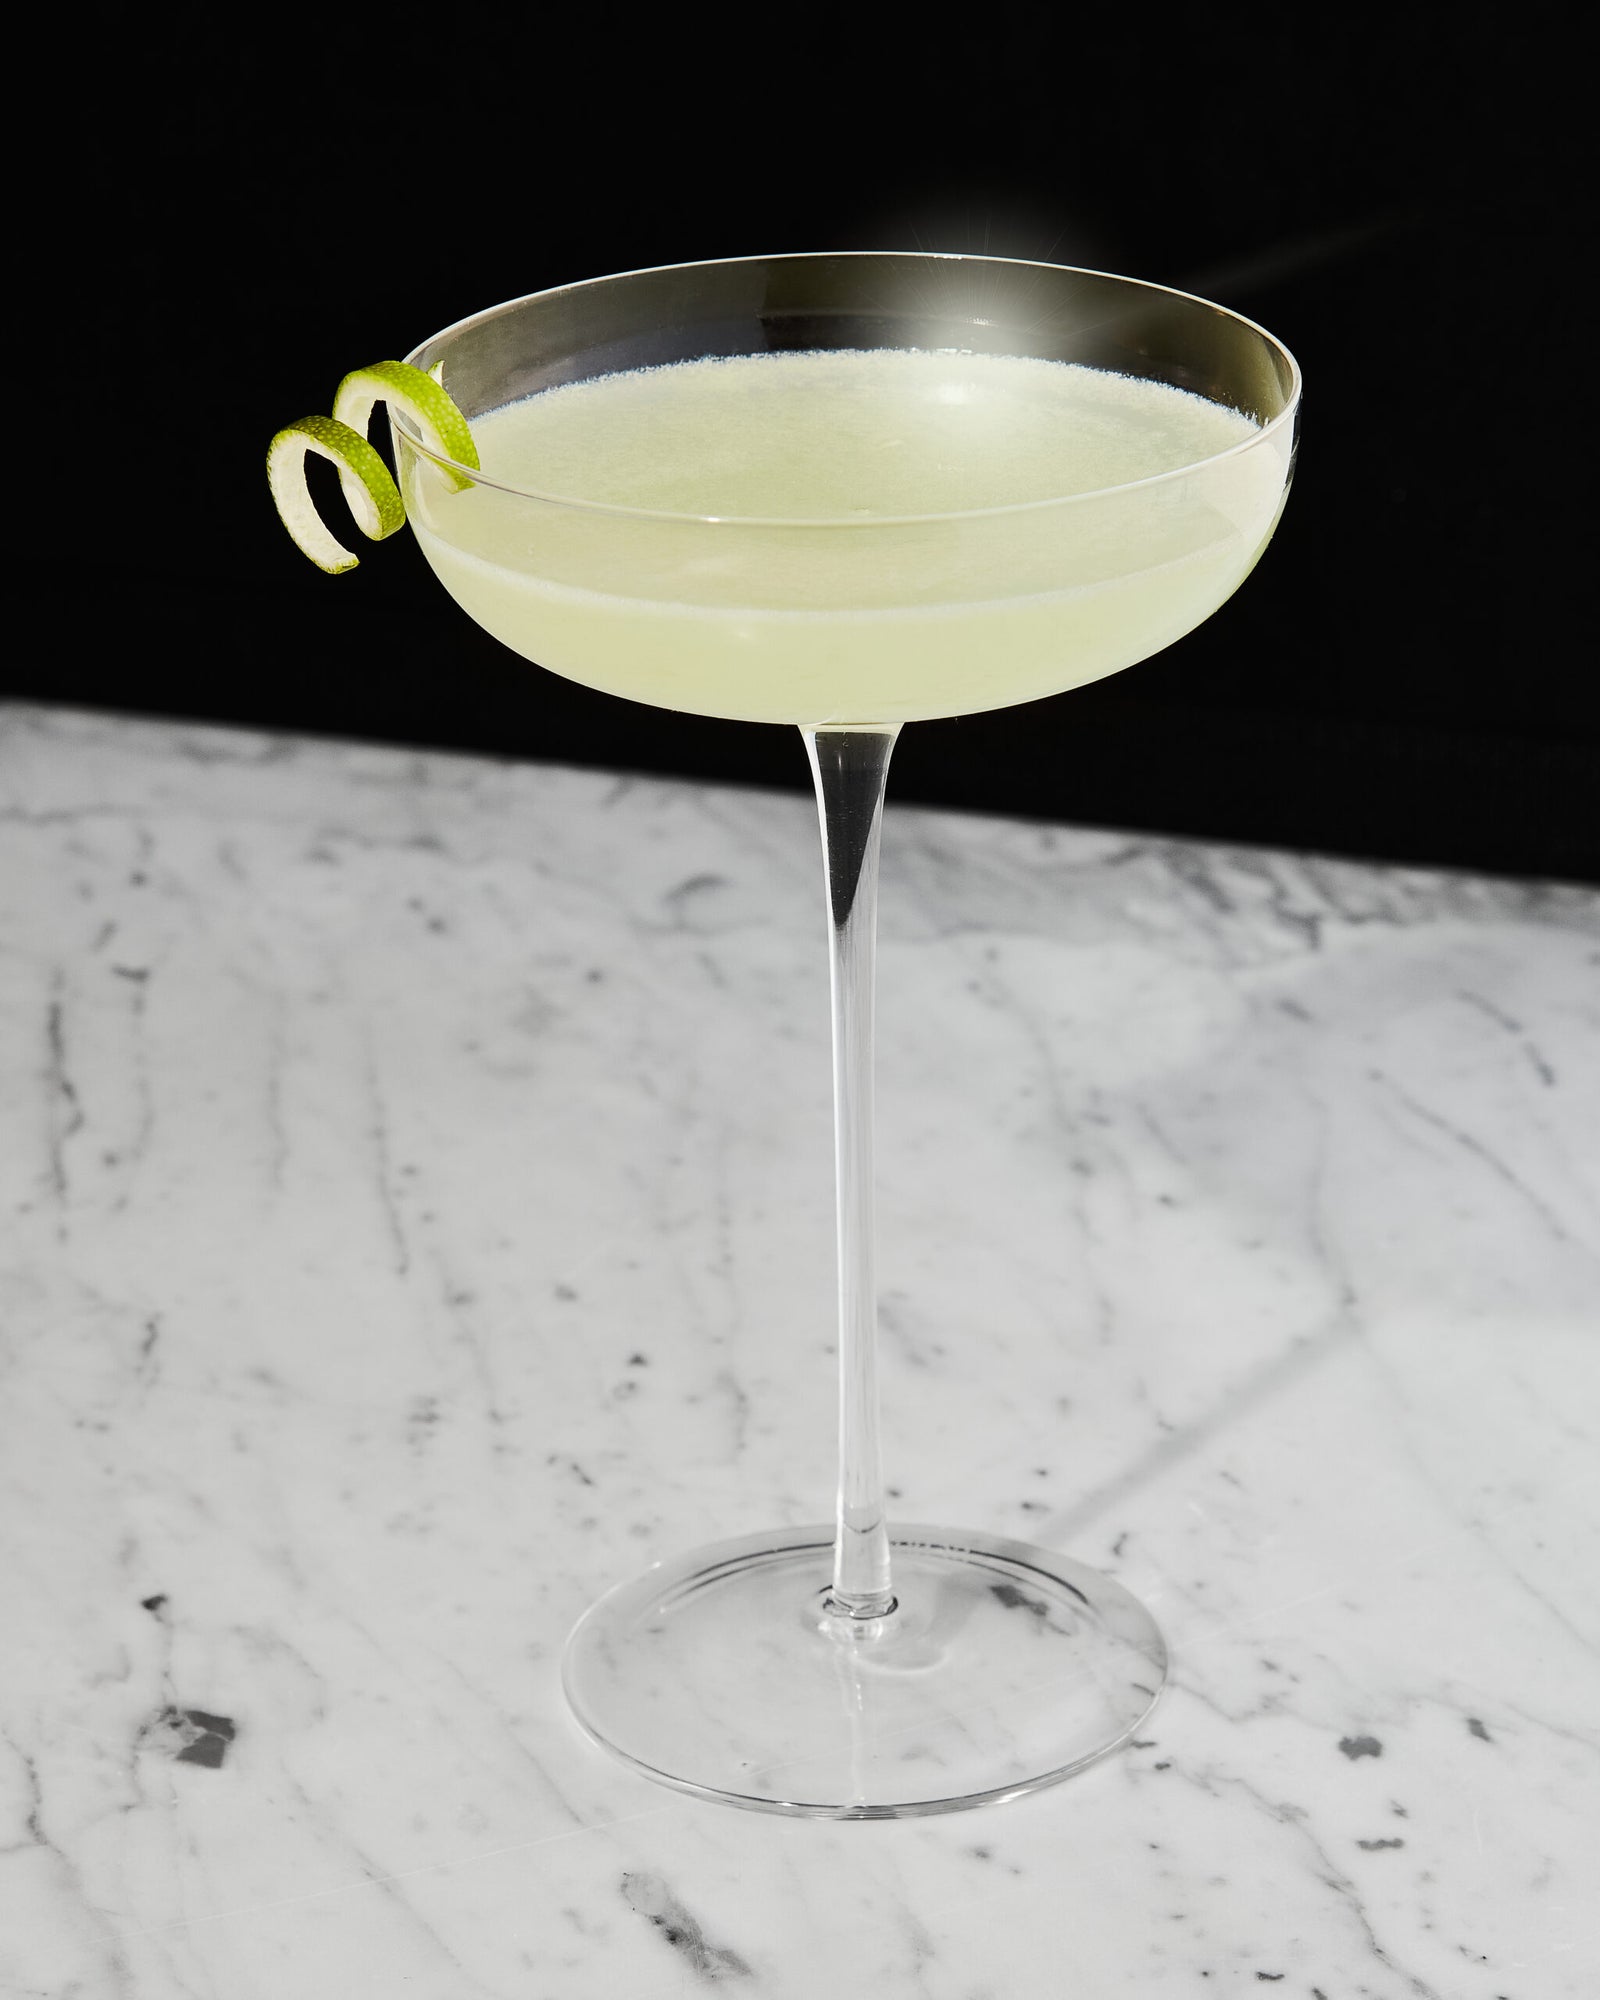 The Last Word Cocktail Recipe